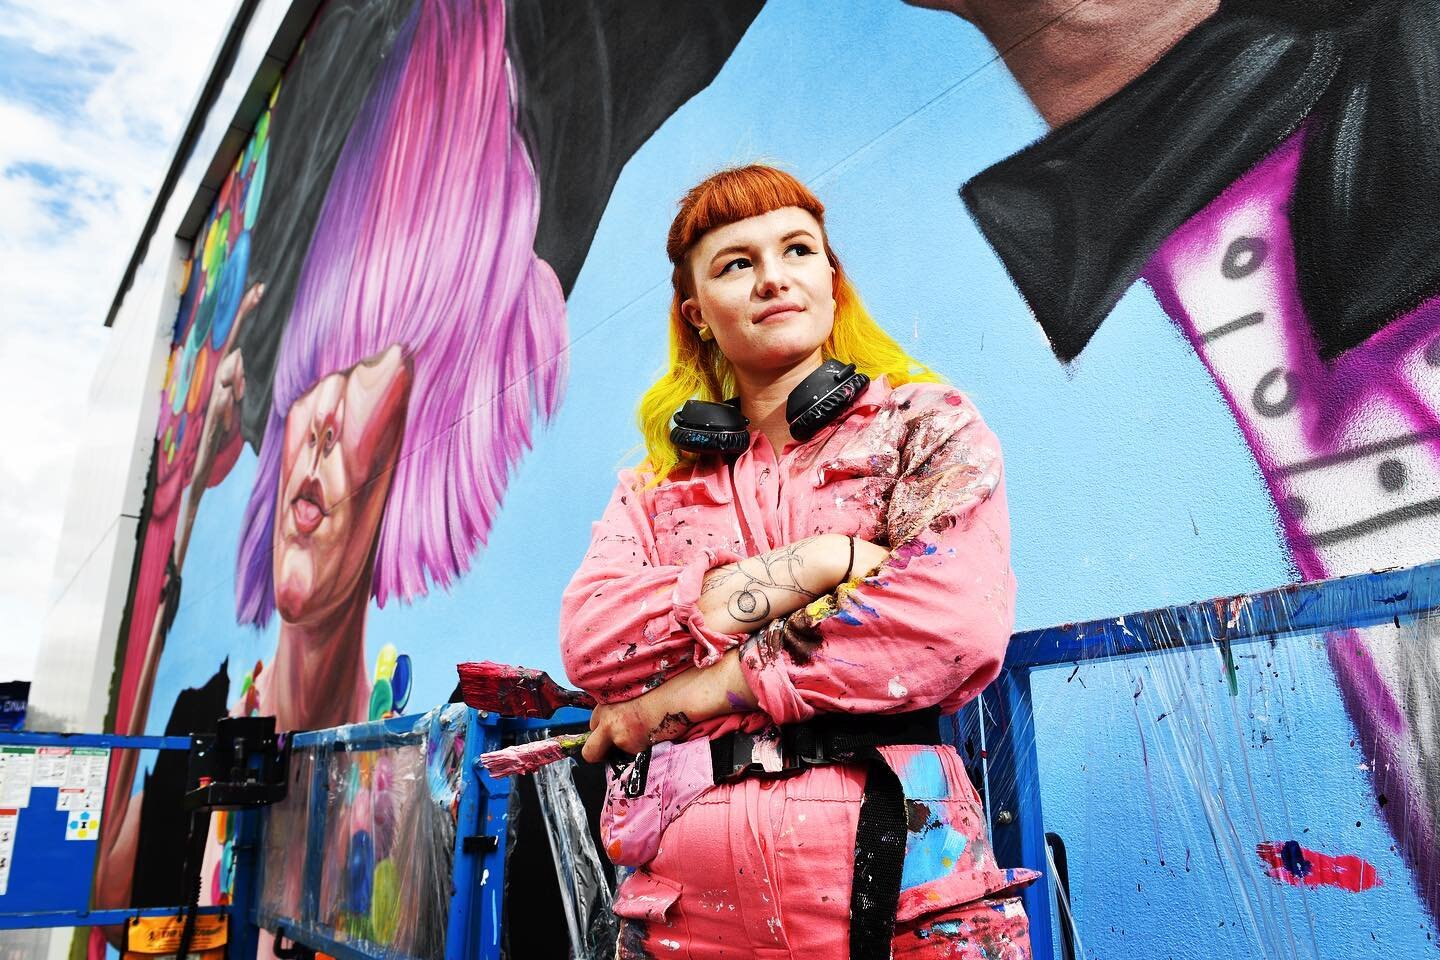 After all your my Wonderwall - the street art of Jasmine Crisp will be part of the Wonderwall Festival that returns to Port Adelaide March 6-8 and her 18m high mural of singer-songwriter Sia will be in the CBD, to immortalise 4 SA music greats on the